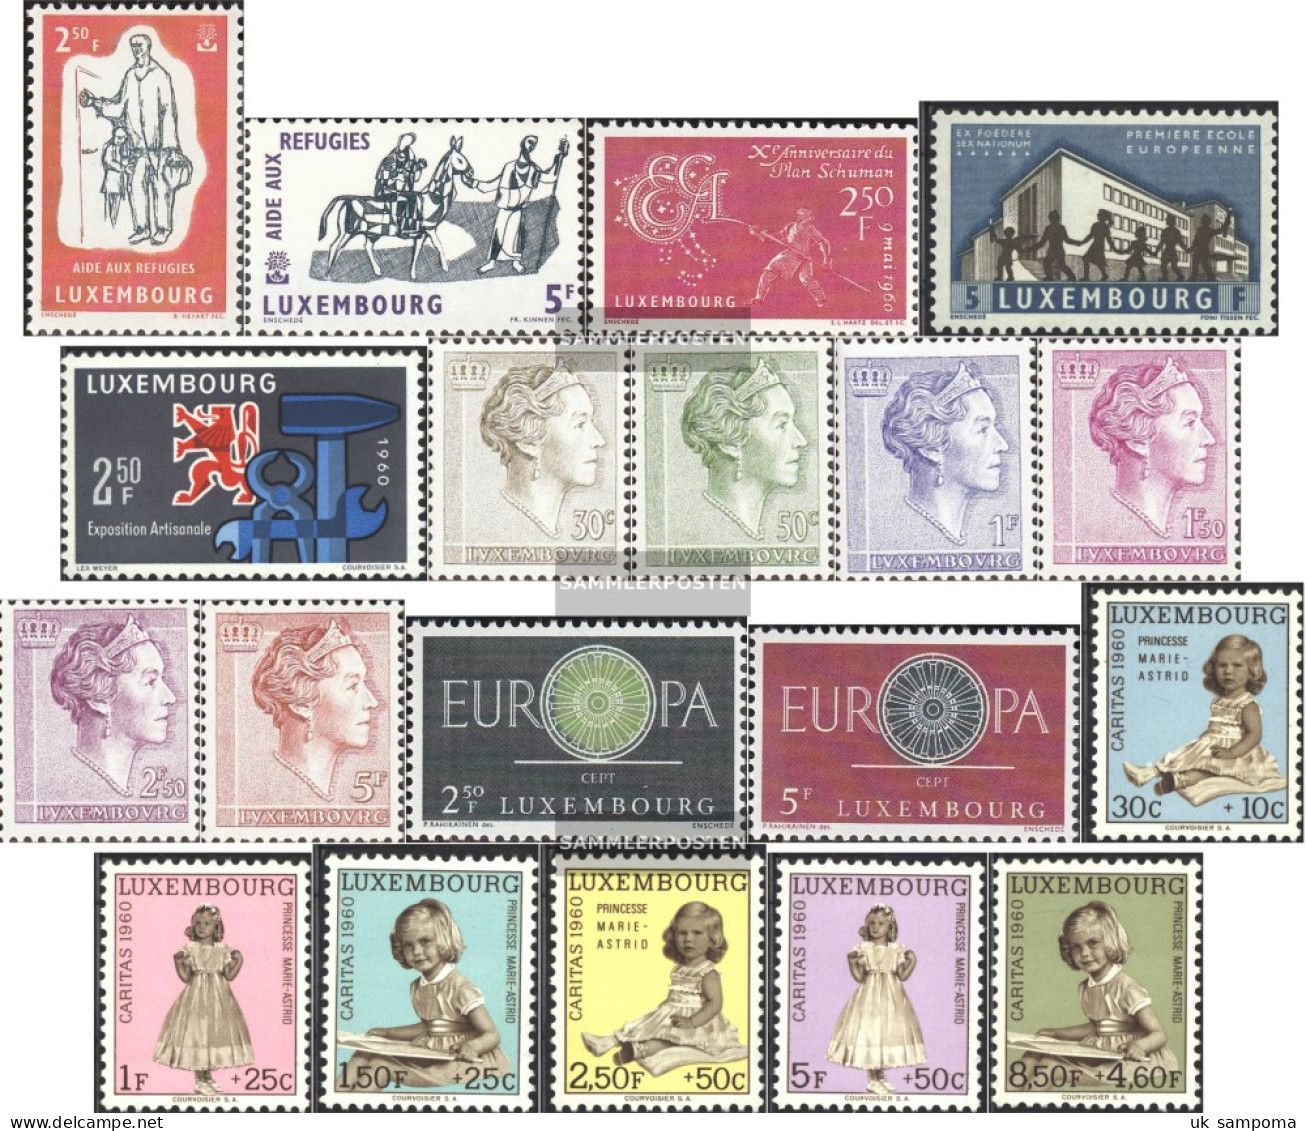 Luxembourg Unmounted Mint / Never Hinged Refugee Years 1960 RefUgee YeArs, CAritAs EUrope U.A - Ungebraucht